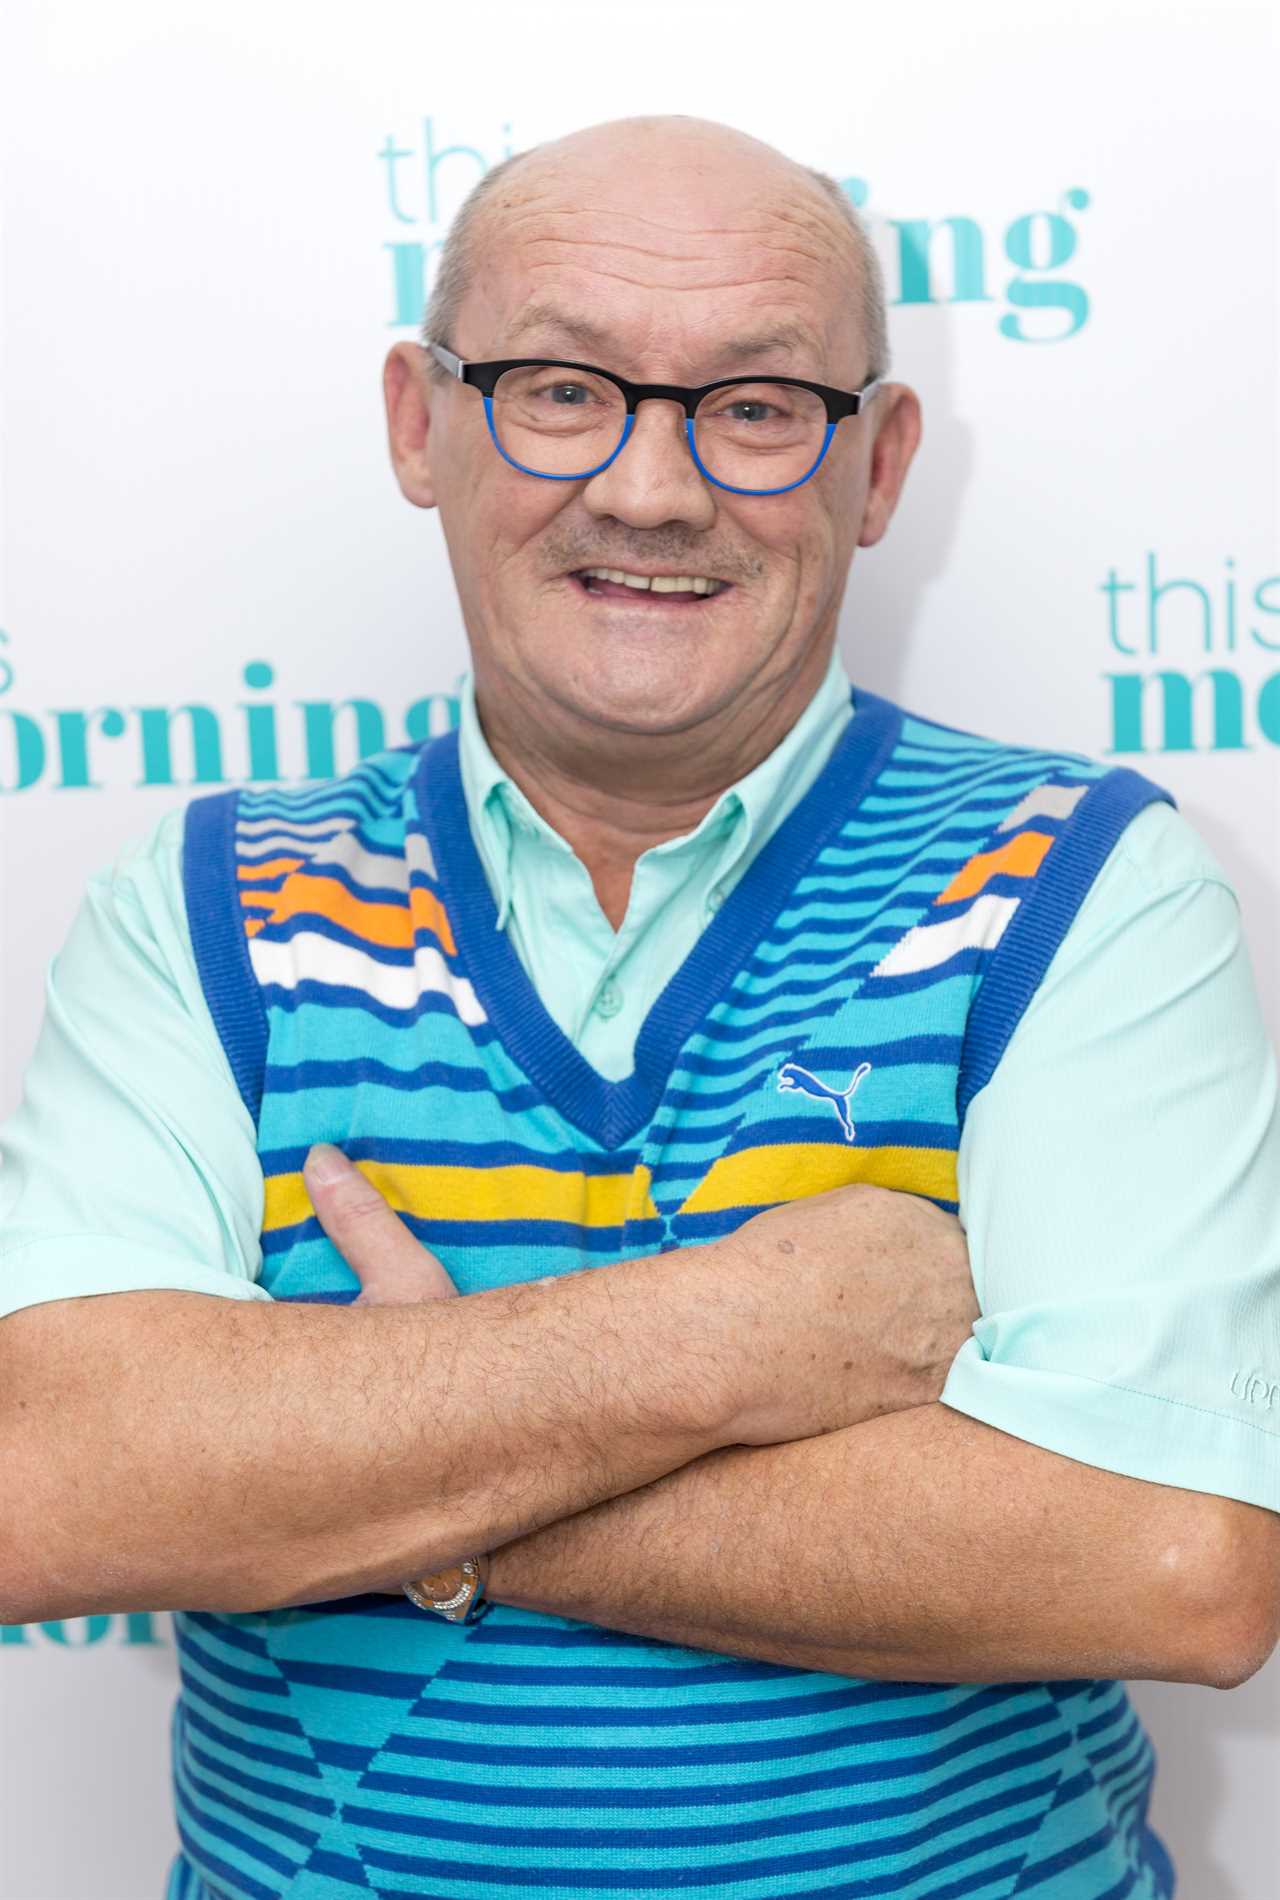 Old men wait at the door for a date with Mrs Brown, says Brendan O’Caroll